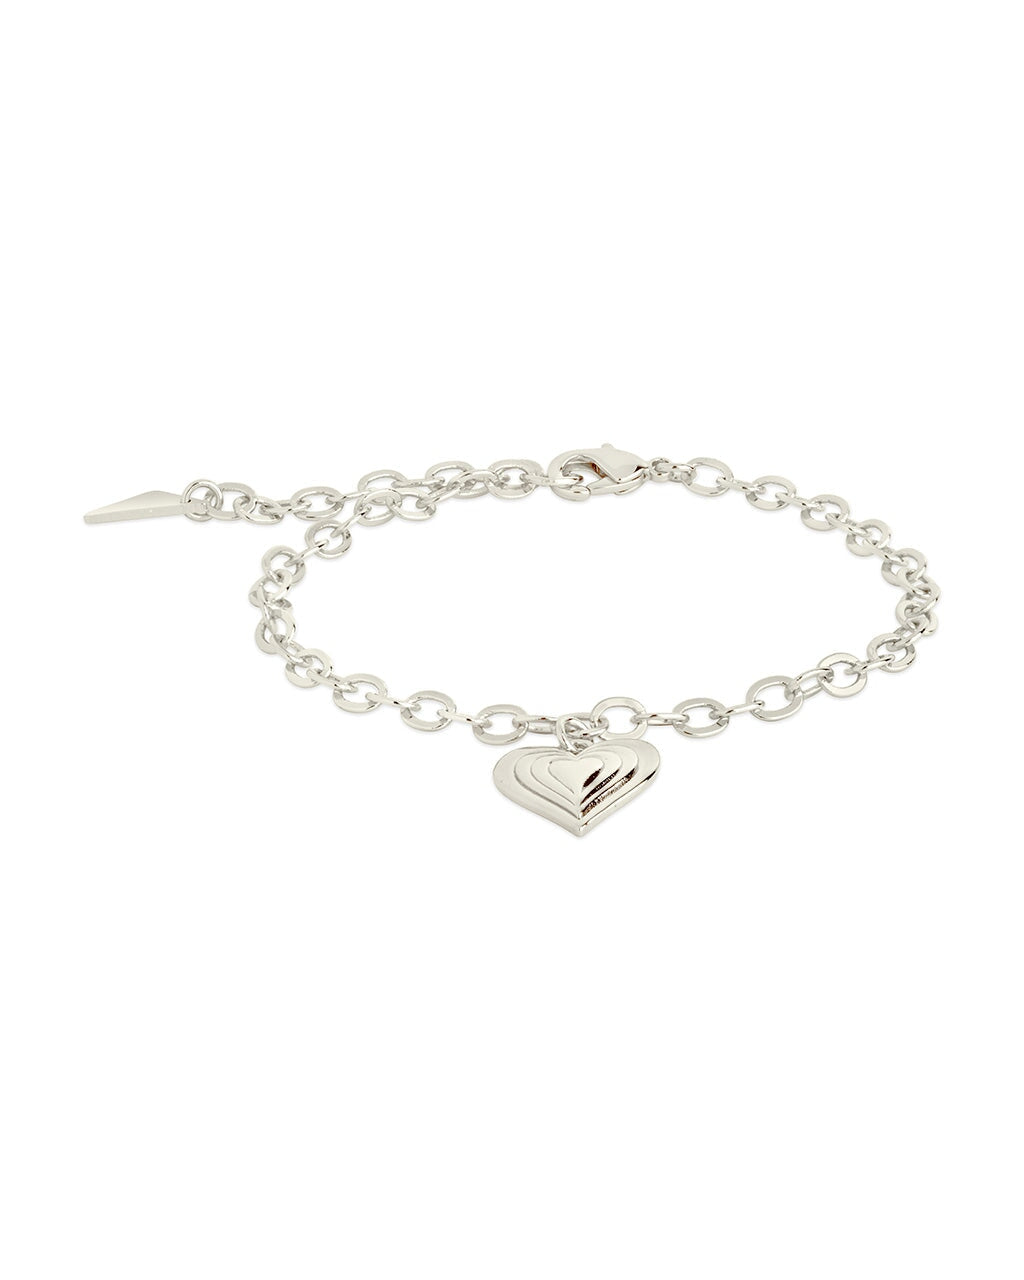 Guide to Charm Bracelets | With Clarity